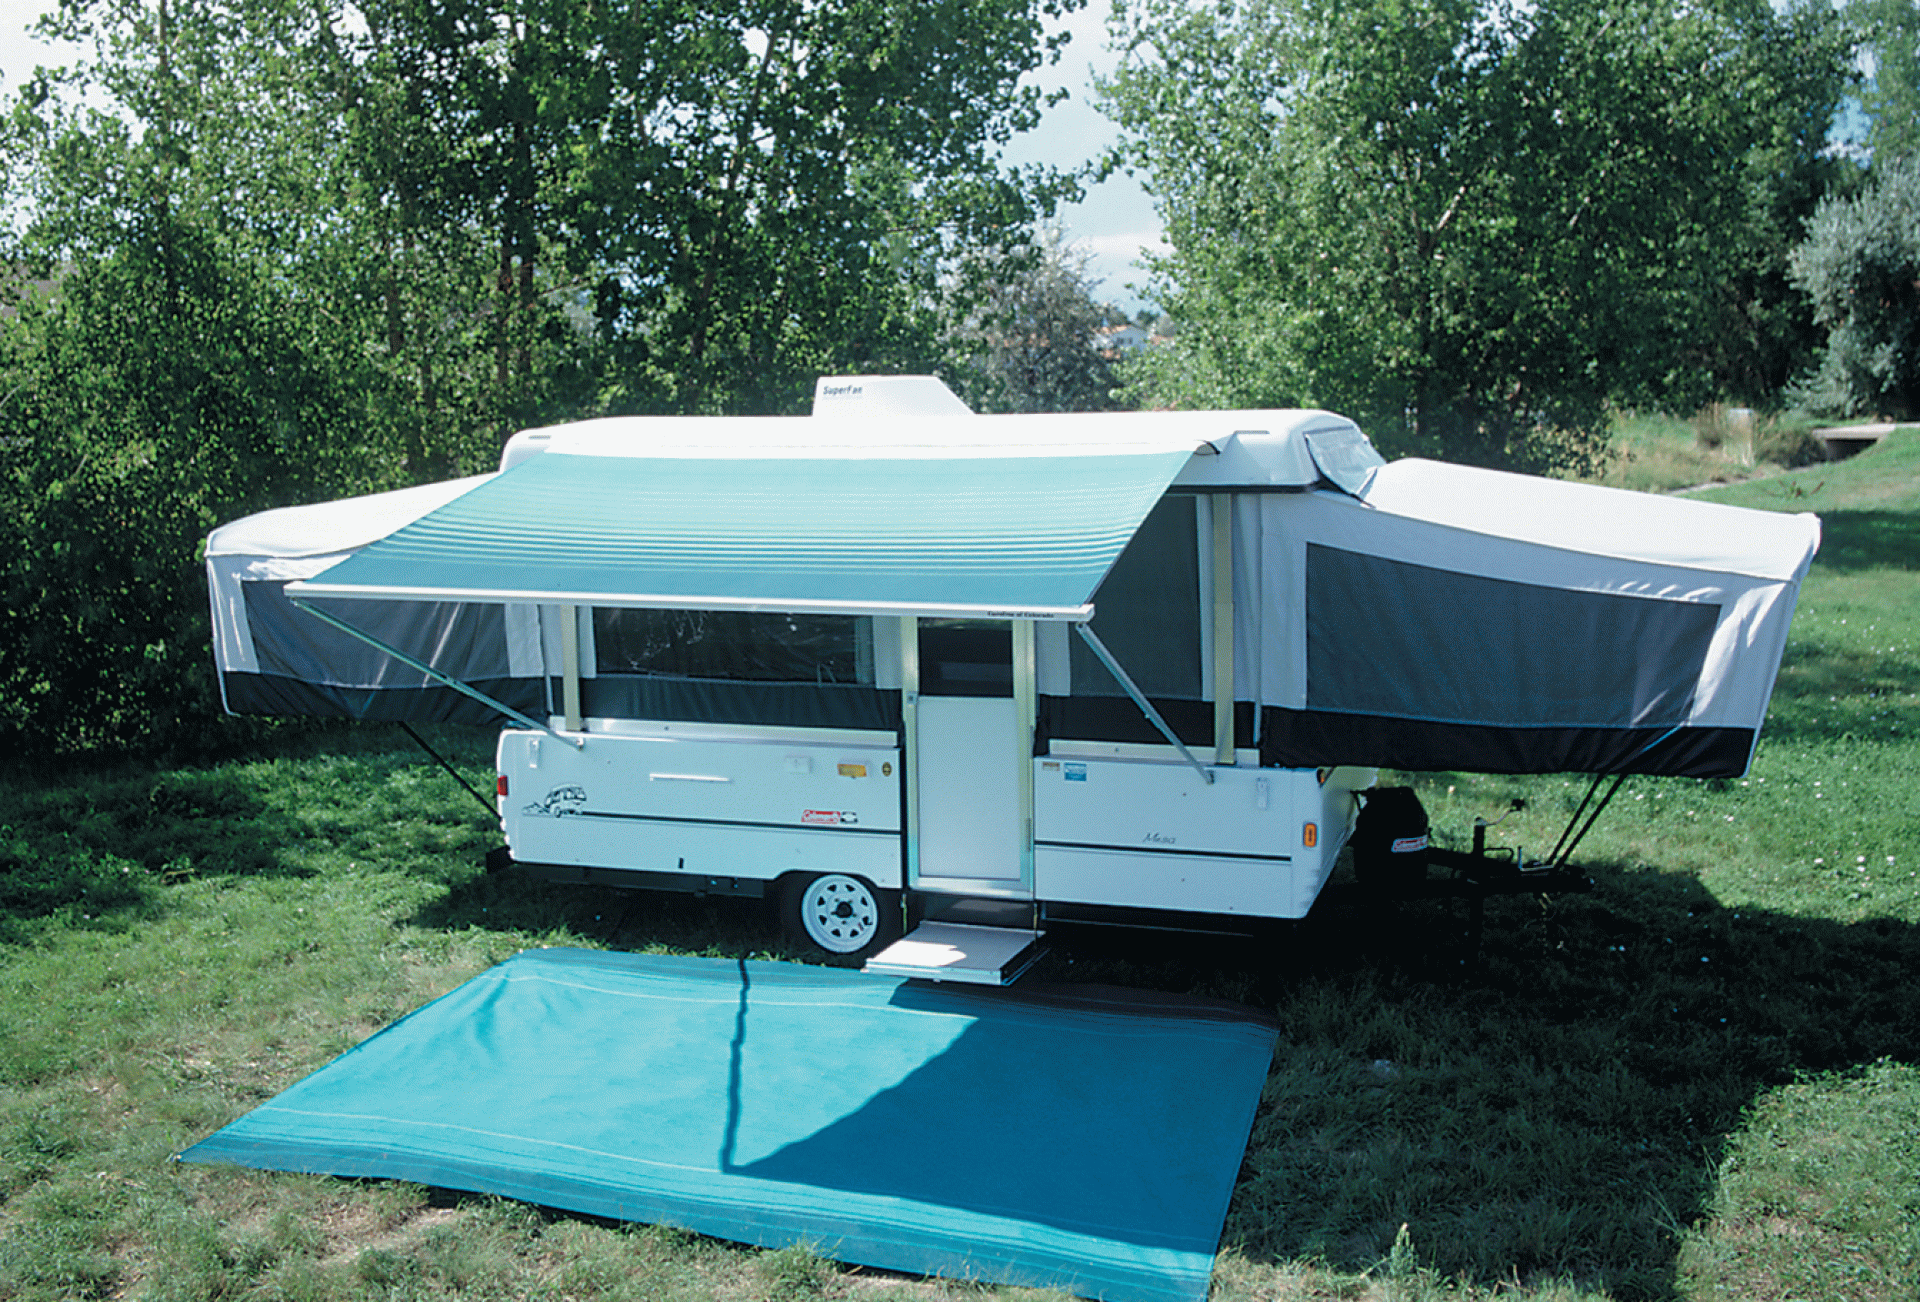 CAREFREE OF COLORADO | 981018E00 | Campout Awning 2.5 Metric 8' 5" Ocean Blue Dune Stripe with White Bag